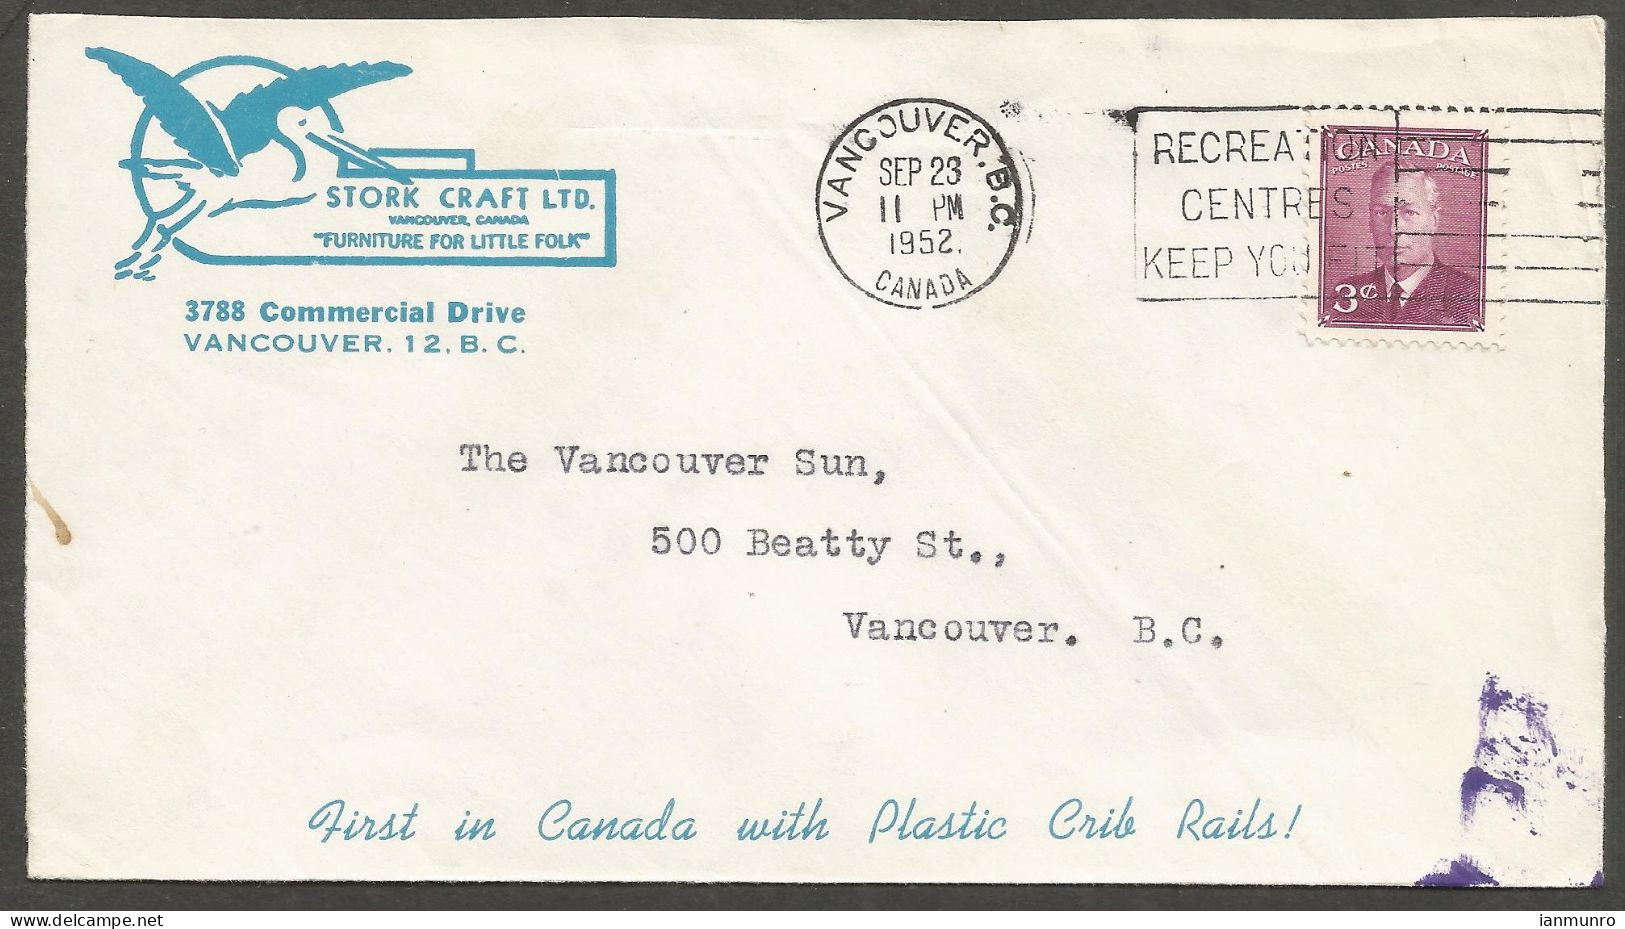 1952 Stork Craft Baby Furniture Illustrated Advertising Cover 3c Vancouver BC - Postal History